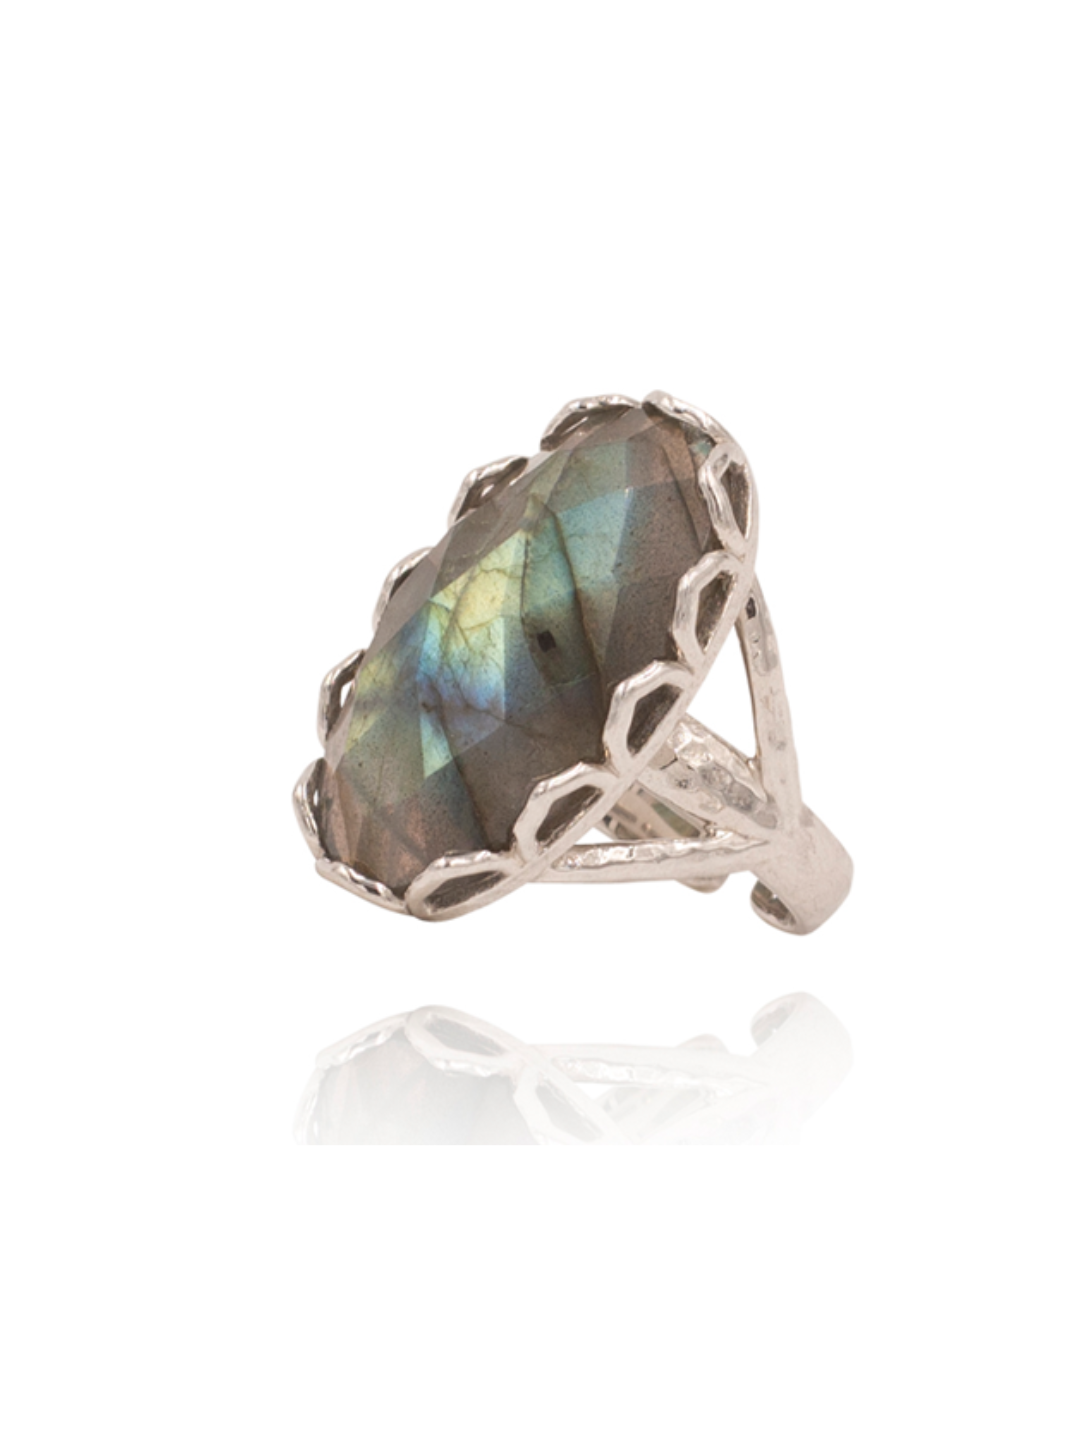 Featuring the extraordinary semi precious stone Labradorite our India Affair cocktail ring is influenced by the designers Indian heritage. Ethical jewelry sustainable fashion brand